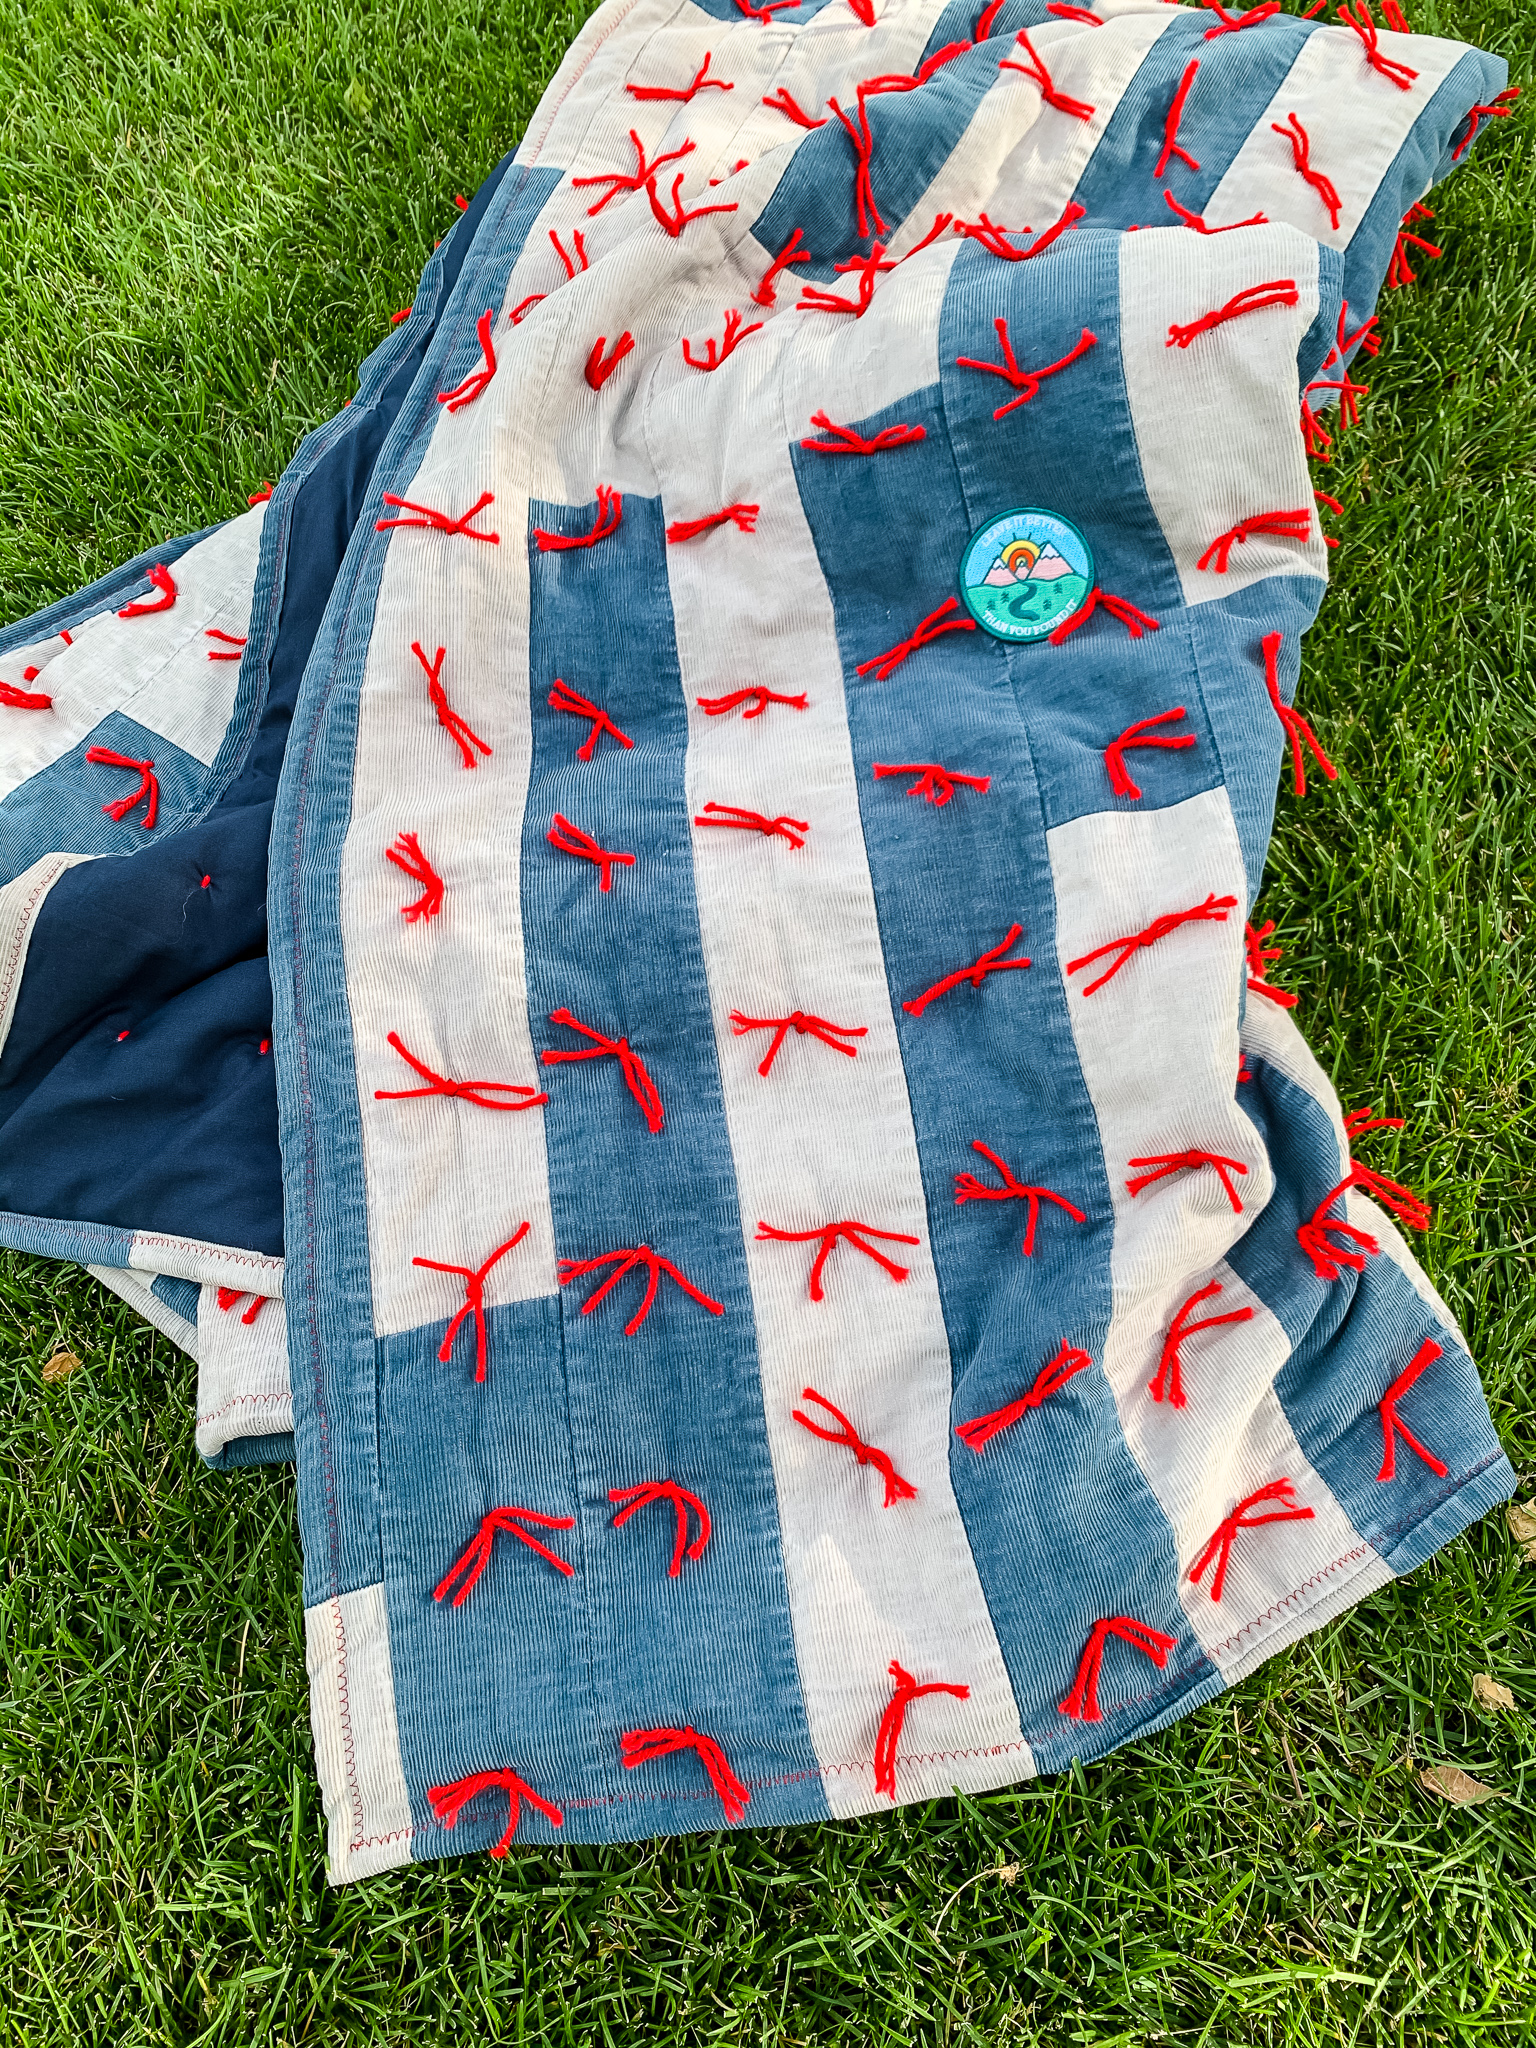 Dad's remade quilt, ready for Father's Day | Gypsy Magpie